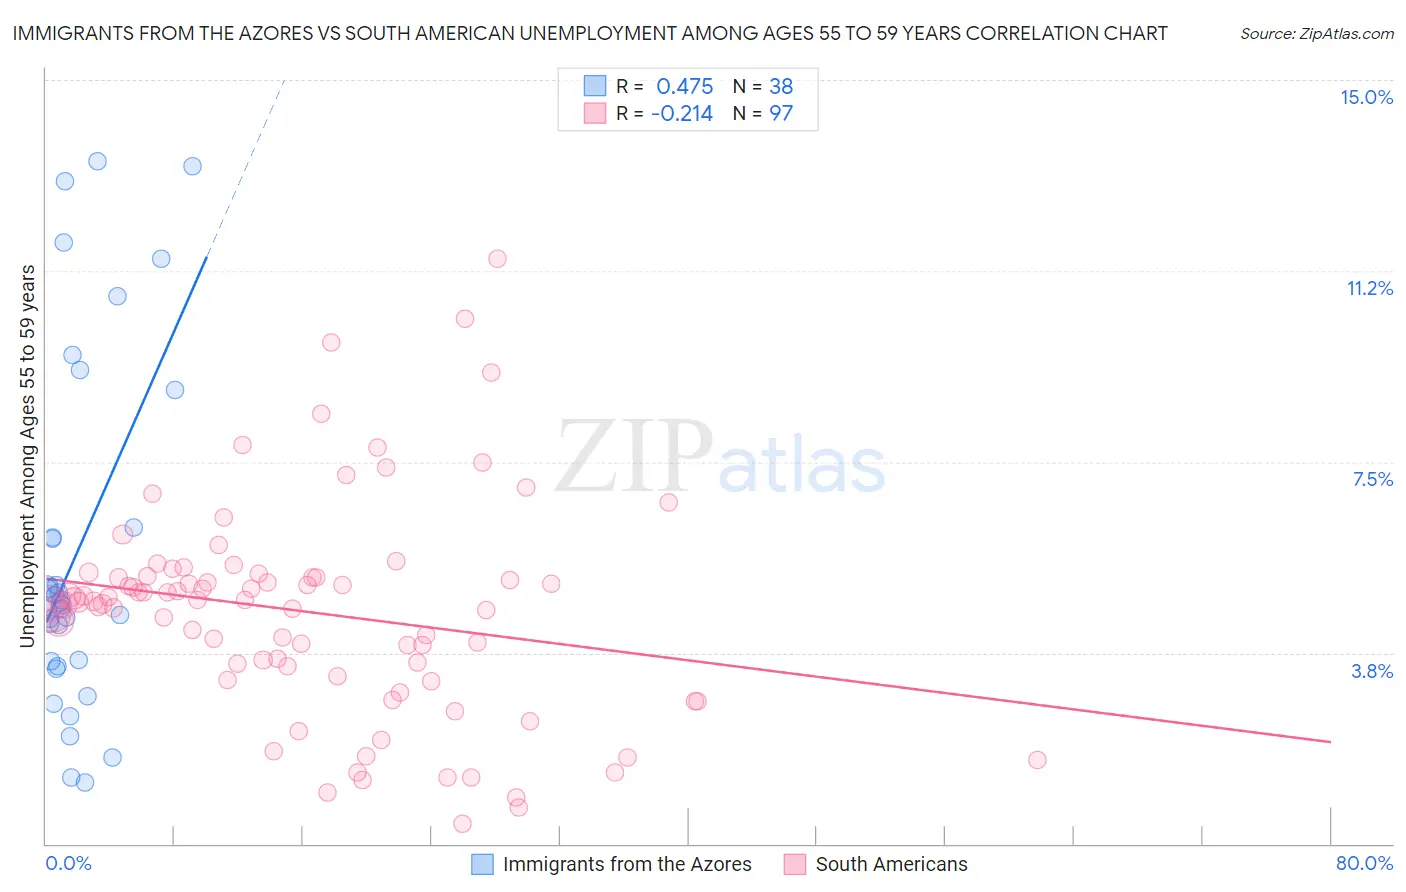 Immigrants from the Azores vs South American Unemployment Among Ages 55 to 59 years